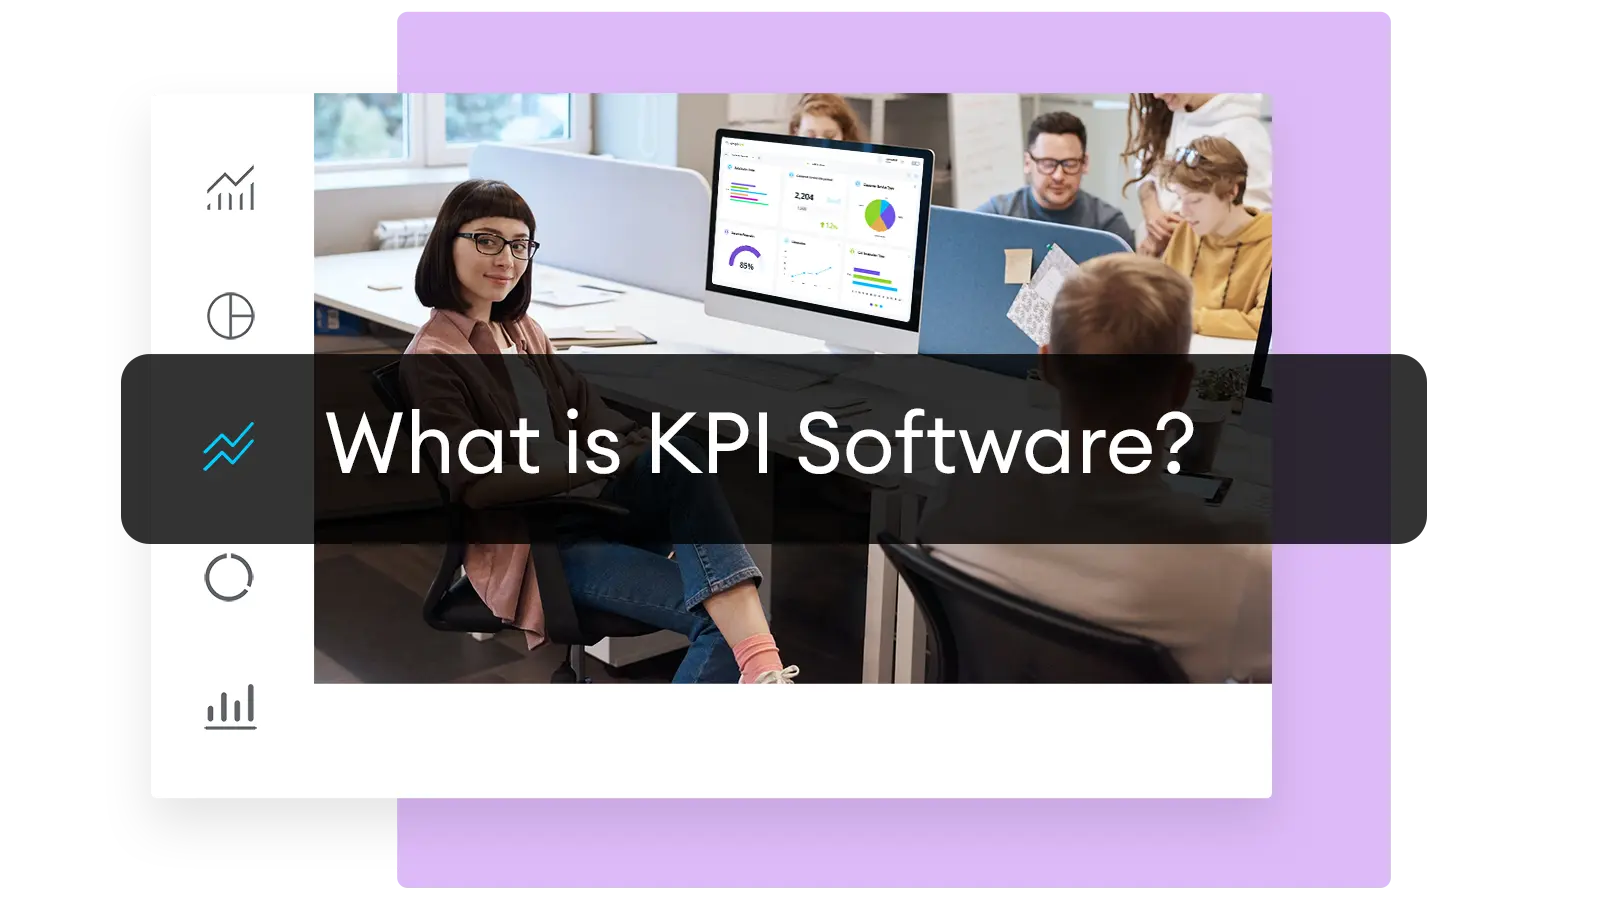 What is KPI Software written over a woman looking at laptop